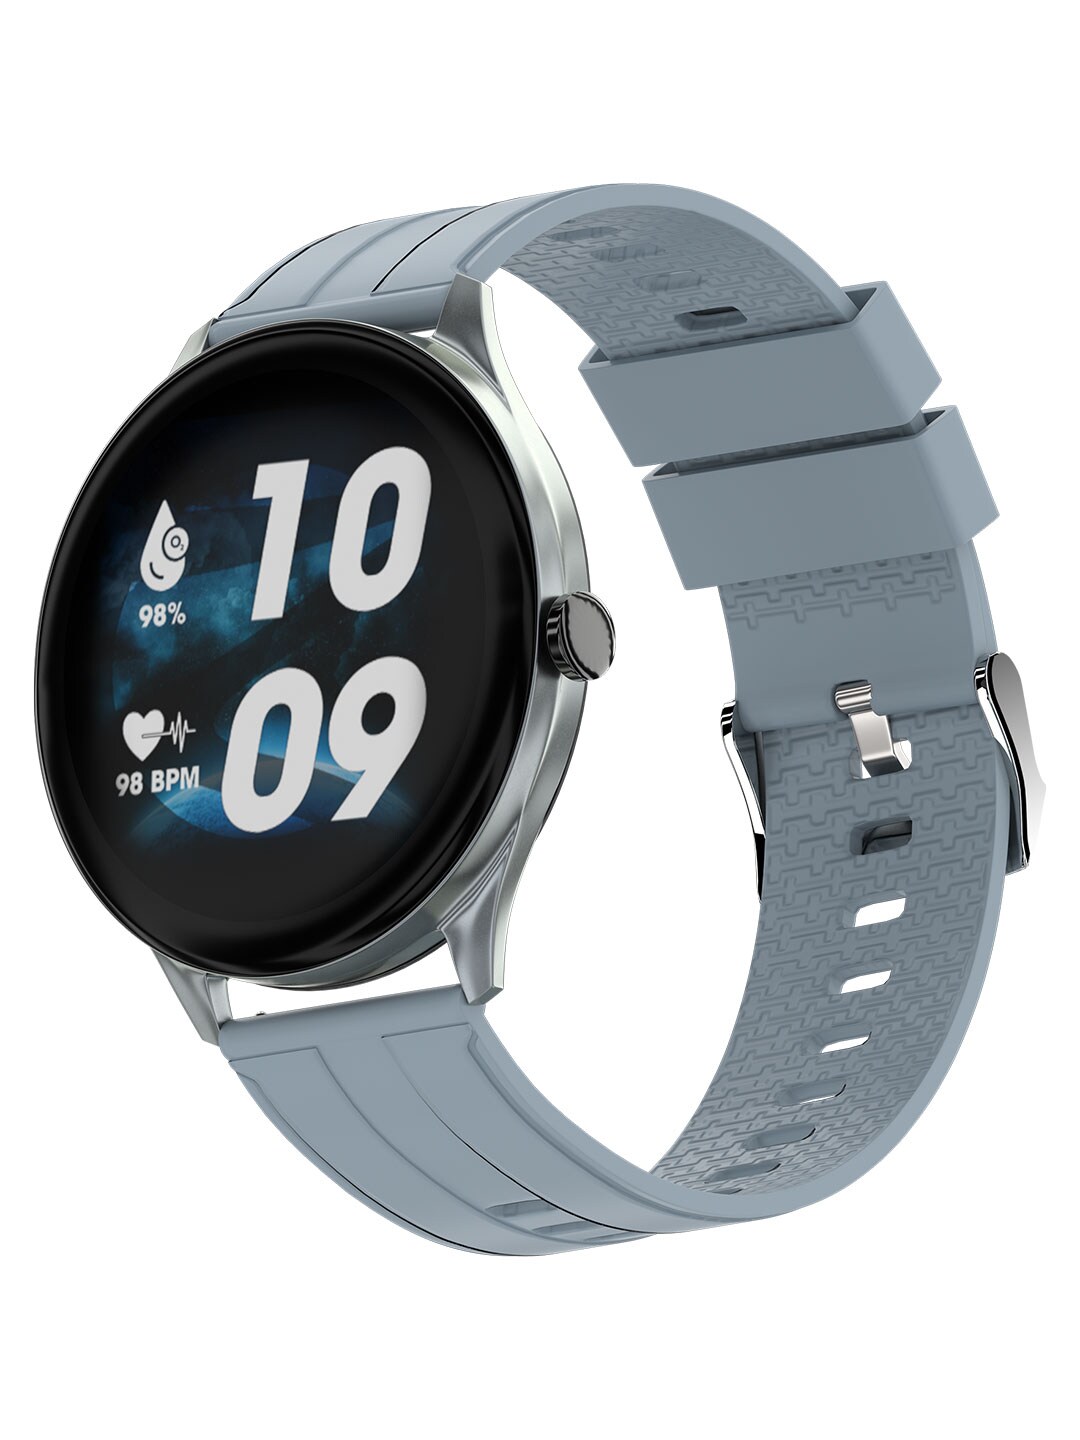 ZEBRONICS Sliver FIT2220CH Smart Watch Price in India